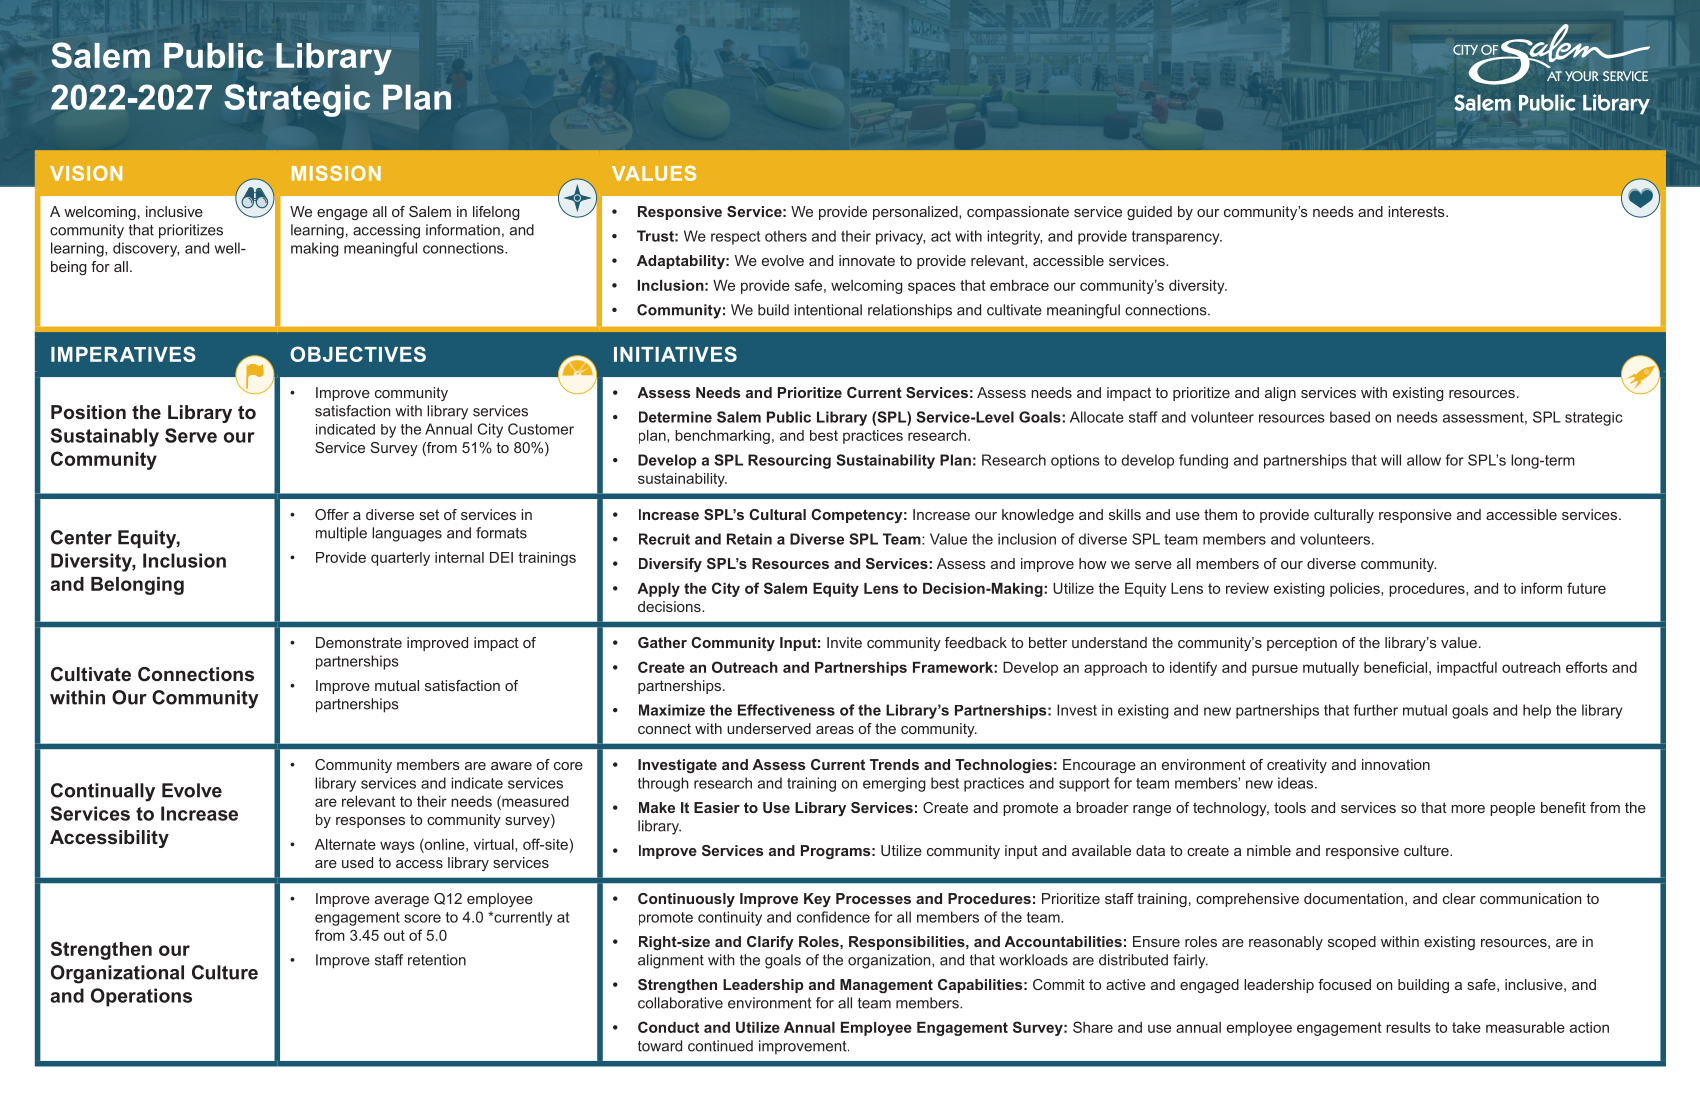 Image of the Salem Public Library Strategic Plan table found in the downloadable PDF.